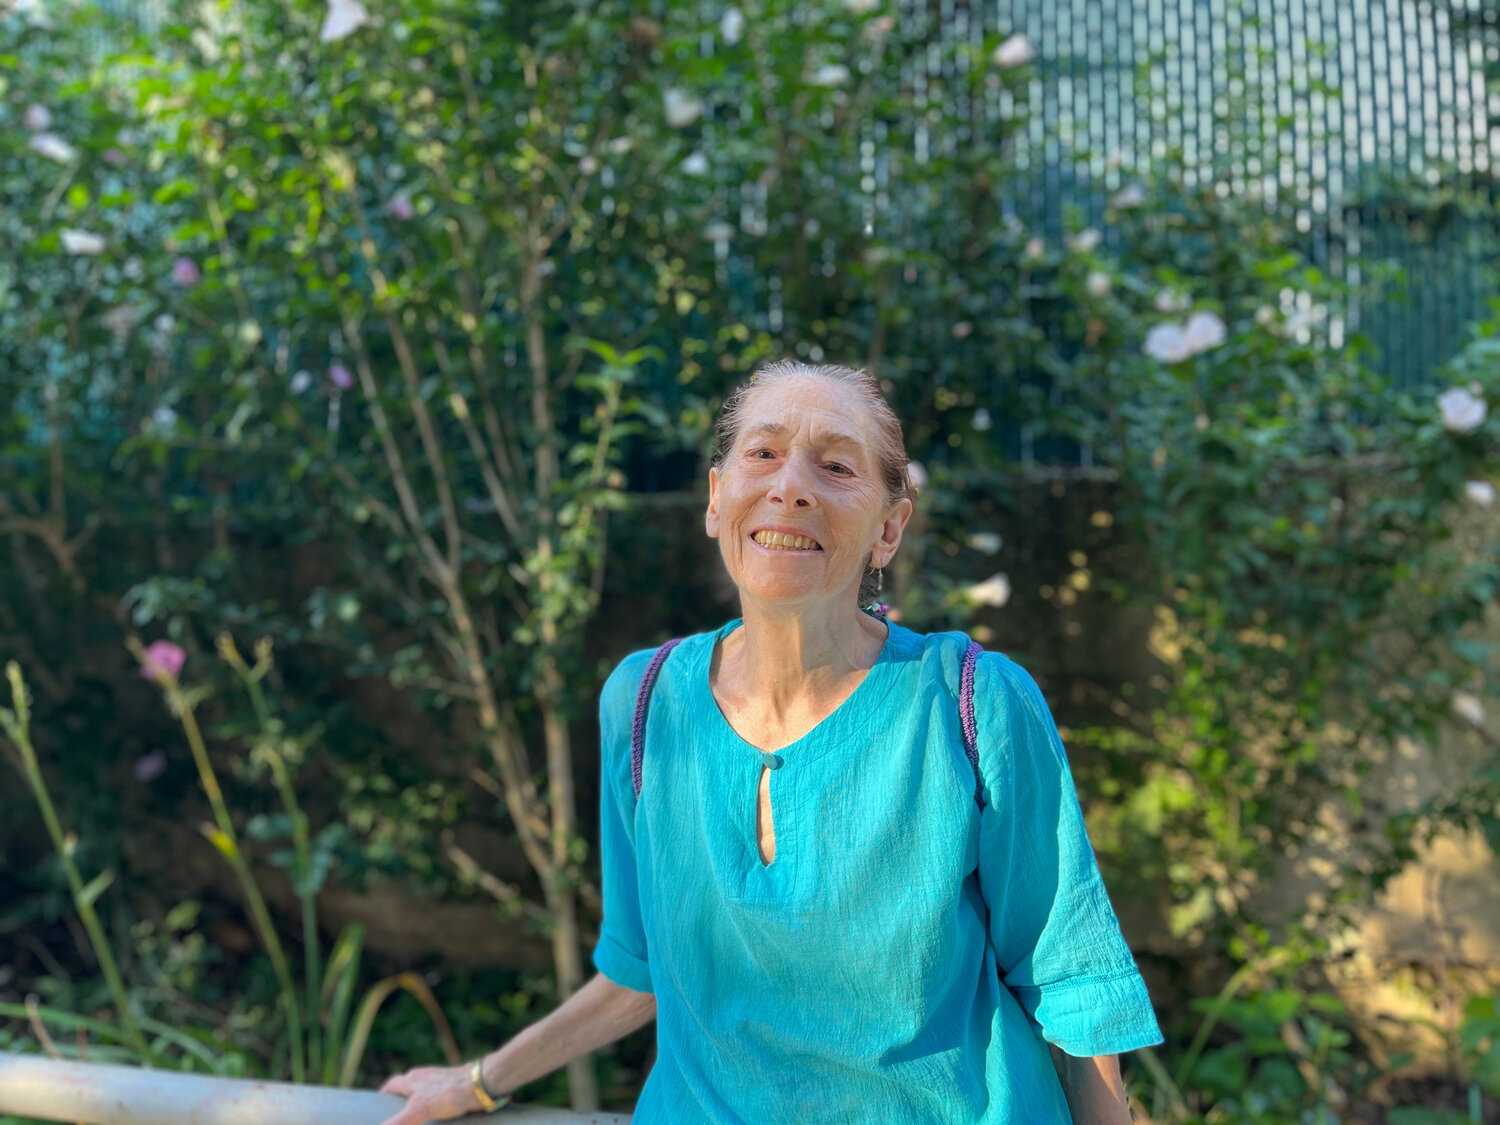 Rita Freed started the community garden at the plaza at Kappock Street and Knolls Crescent in Spuyten Duyvil 14 years ago.